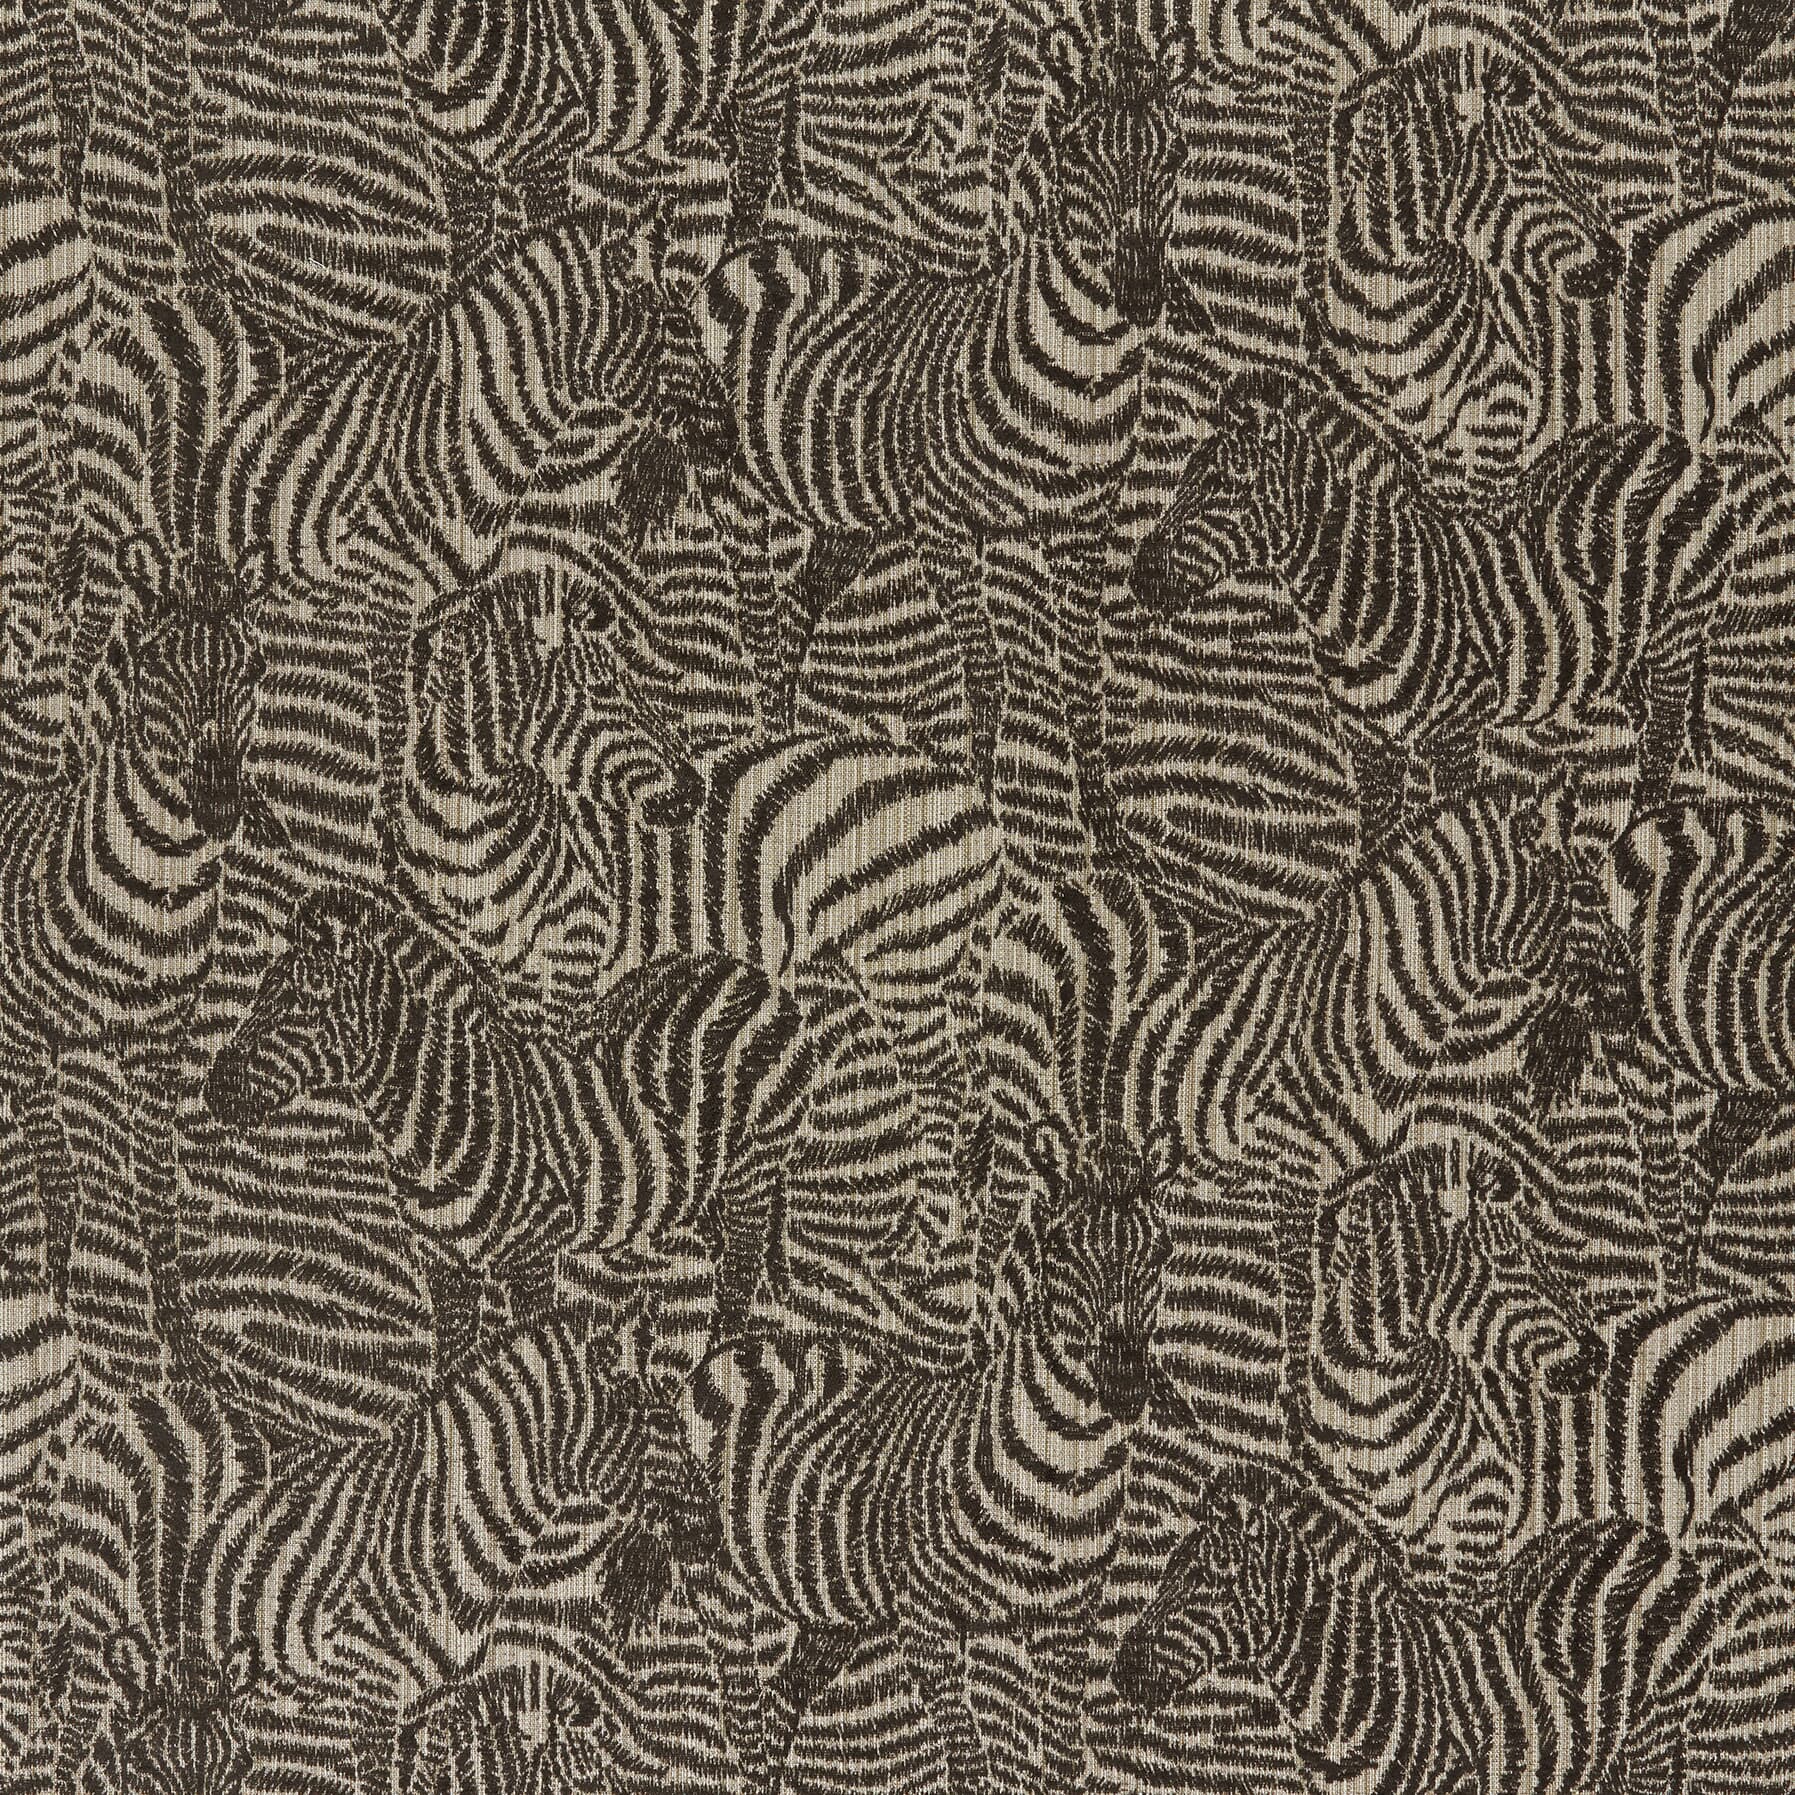 Hawleyville 3 Black/camel by Stout Fabric